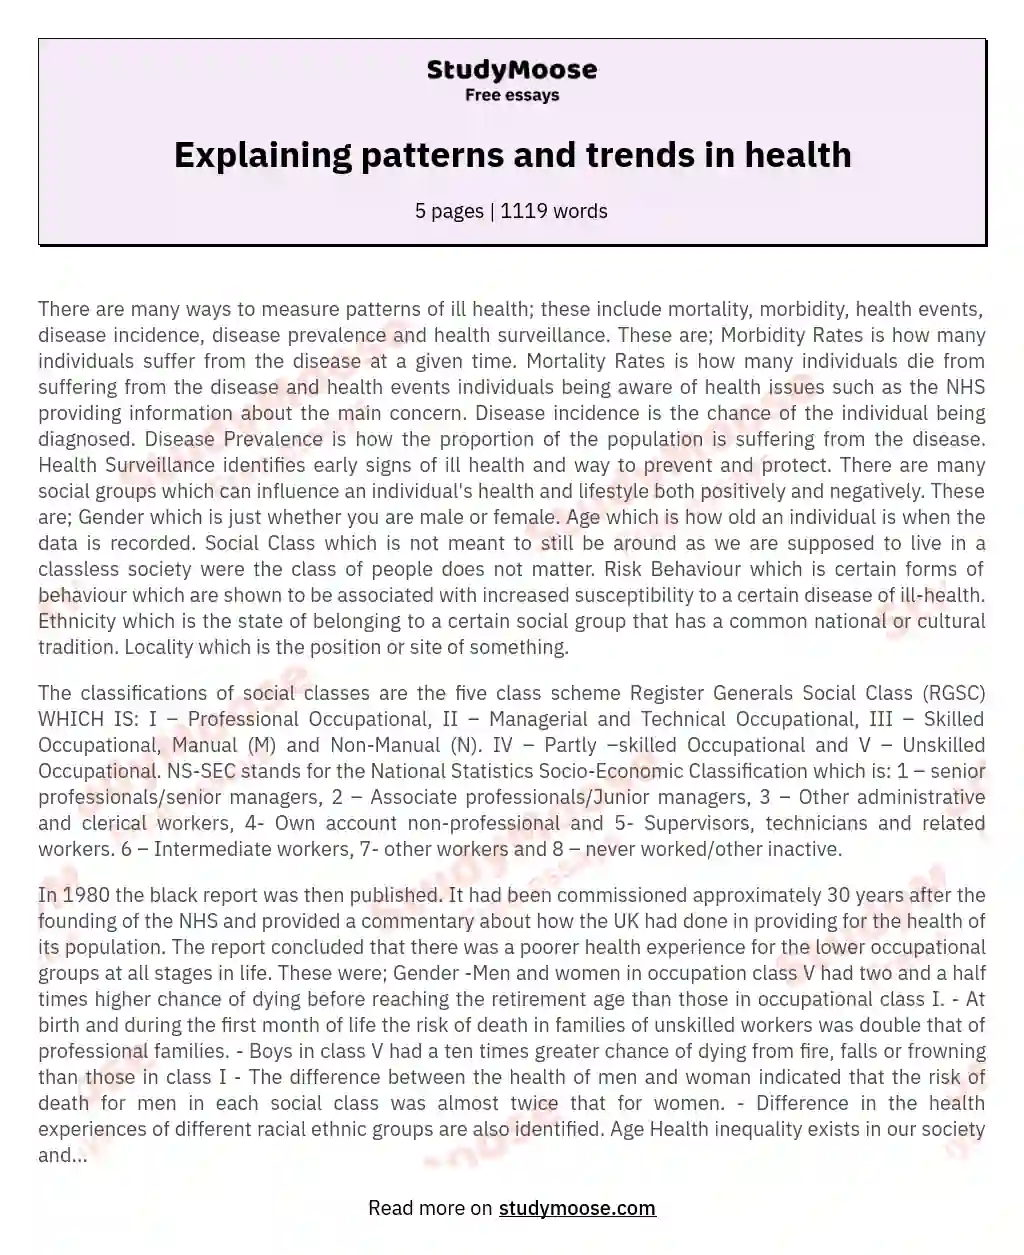 Explaining patterns and trends in health essay